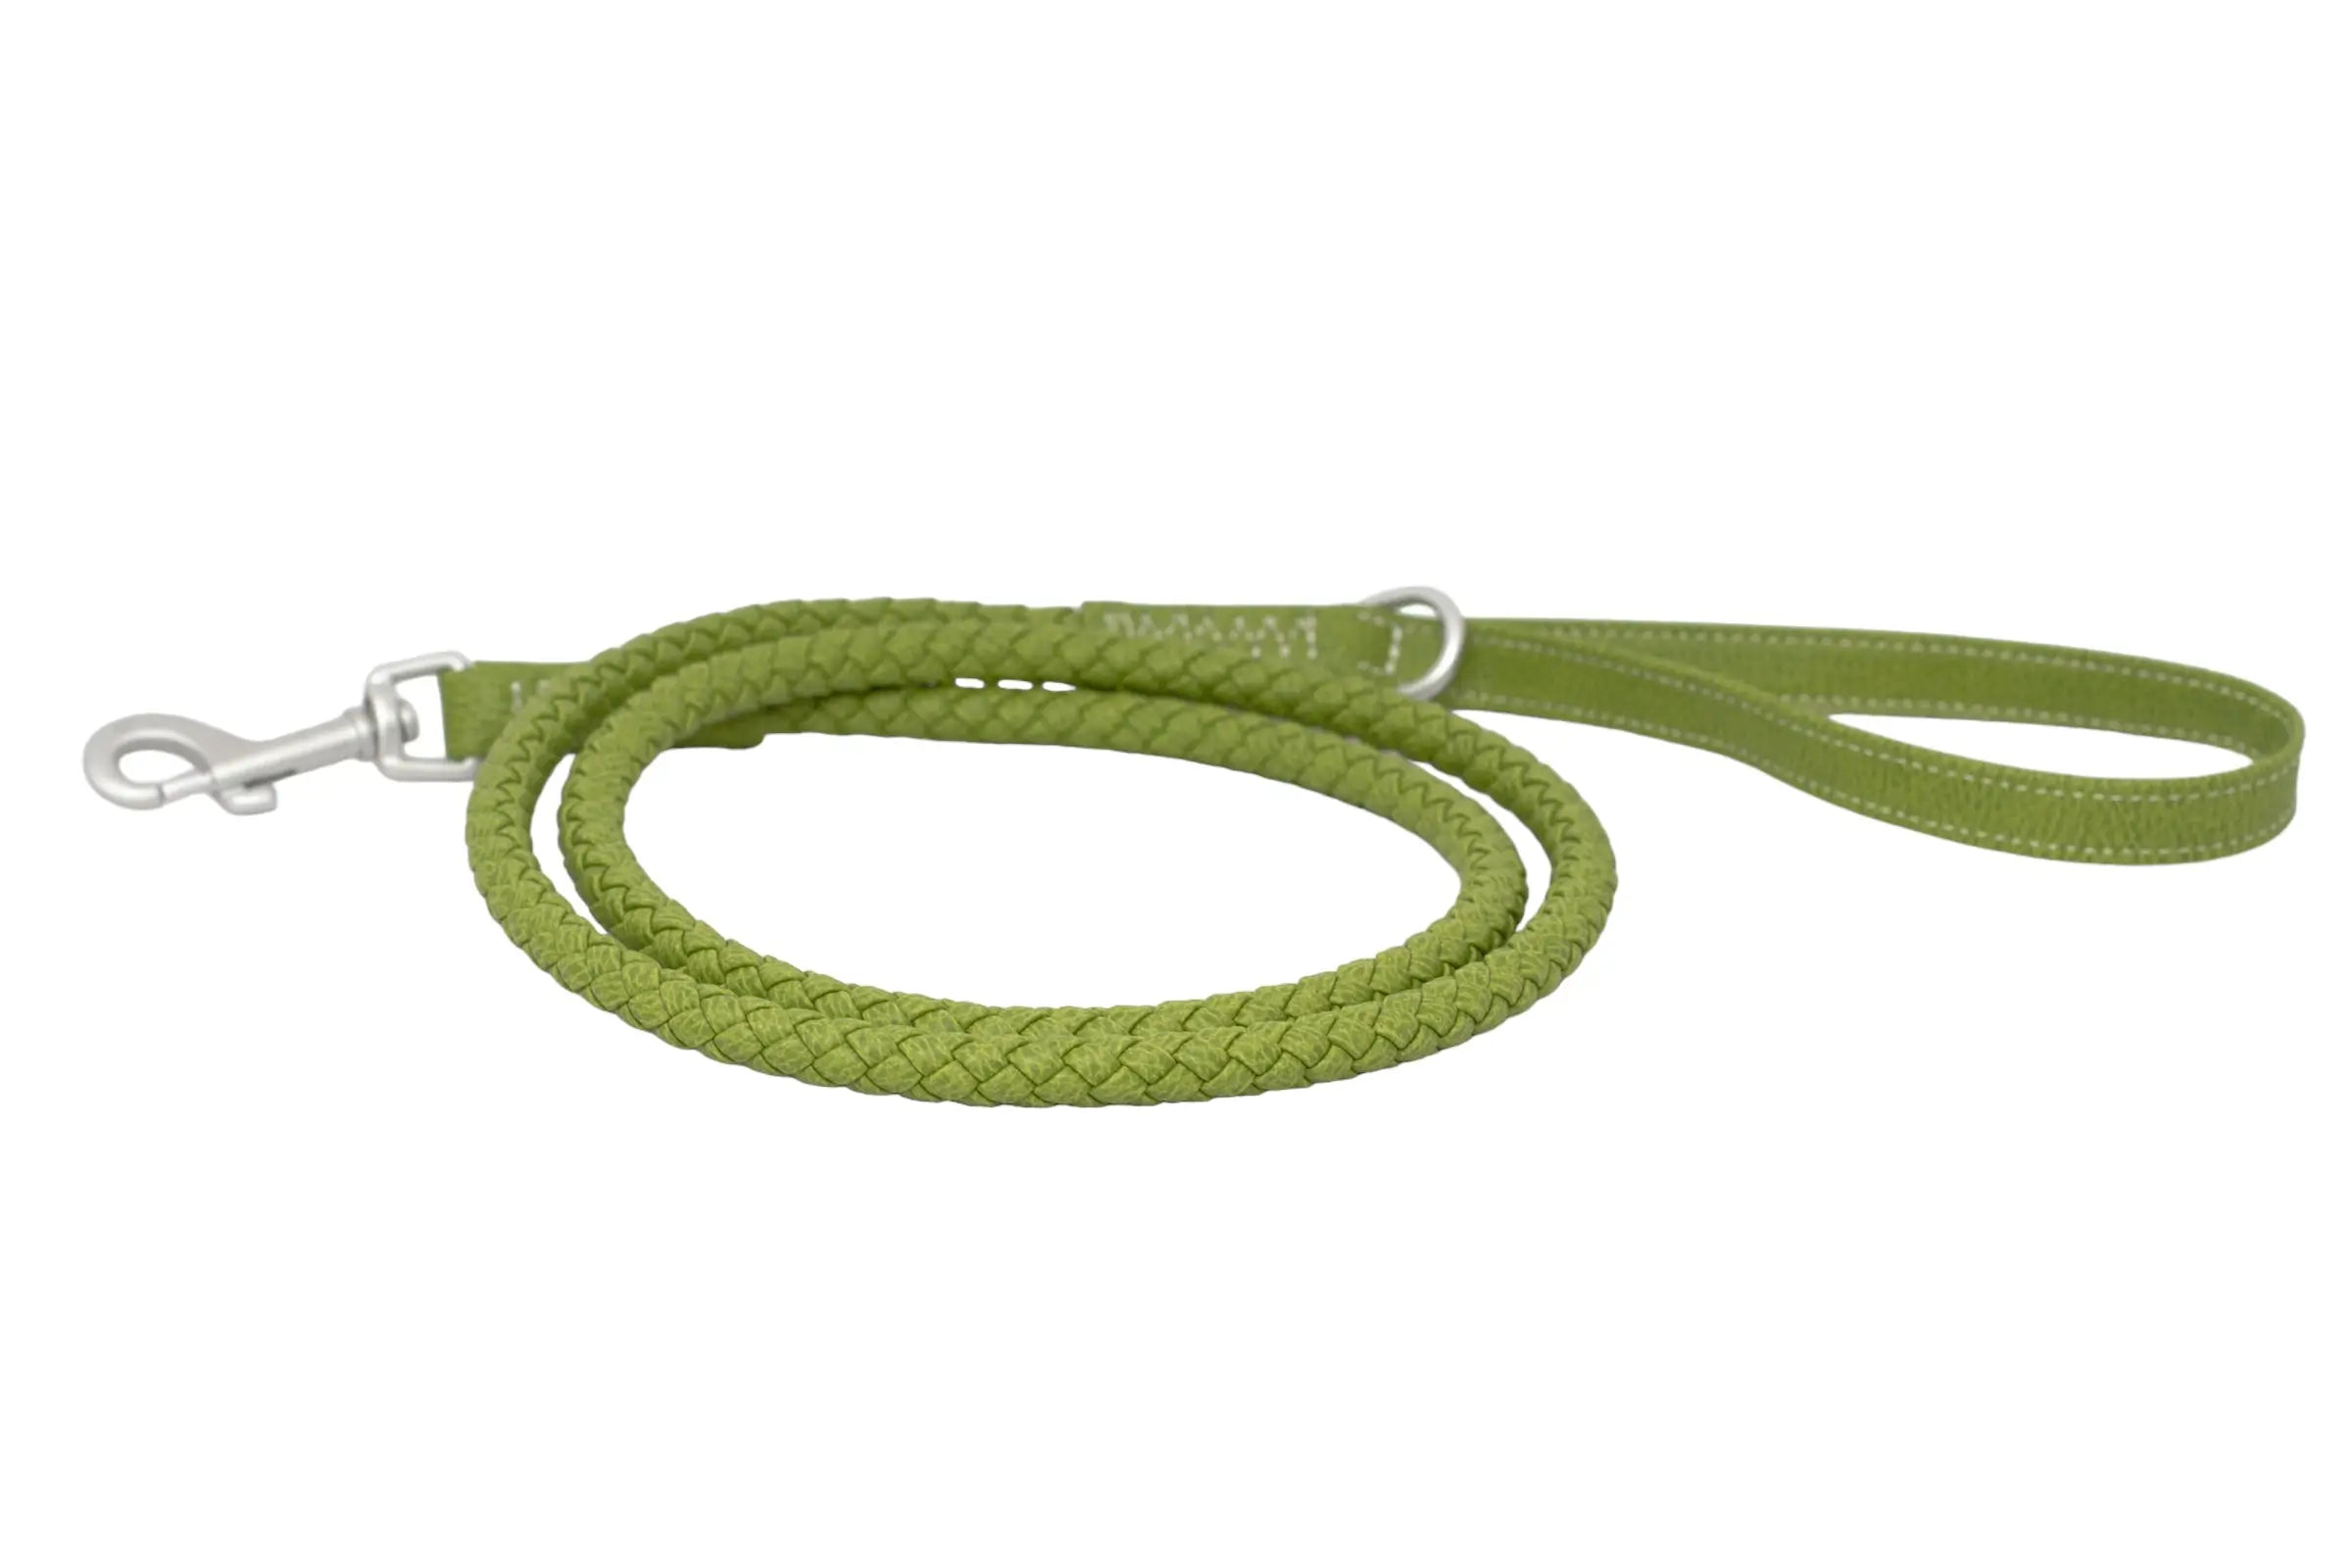 Front of a waterproof and durable dog leash with marine grade anodized aluminum hardware in the color lime green.